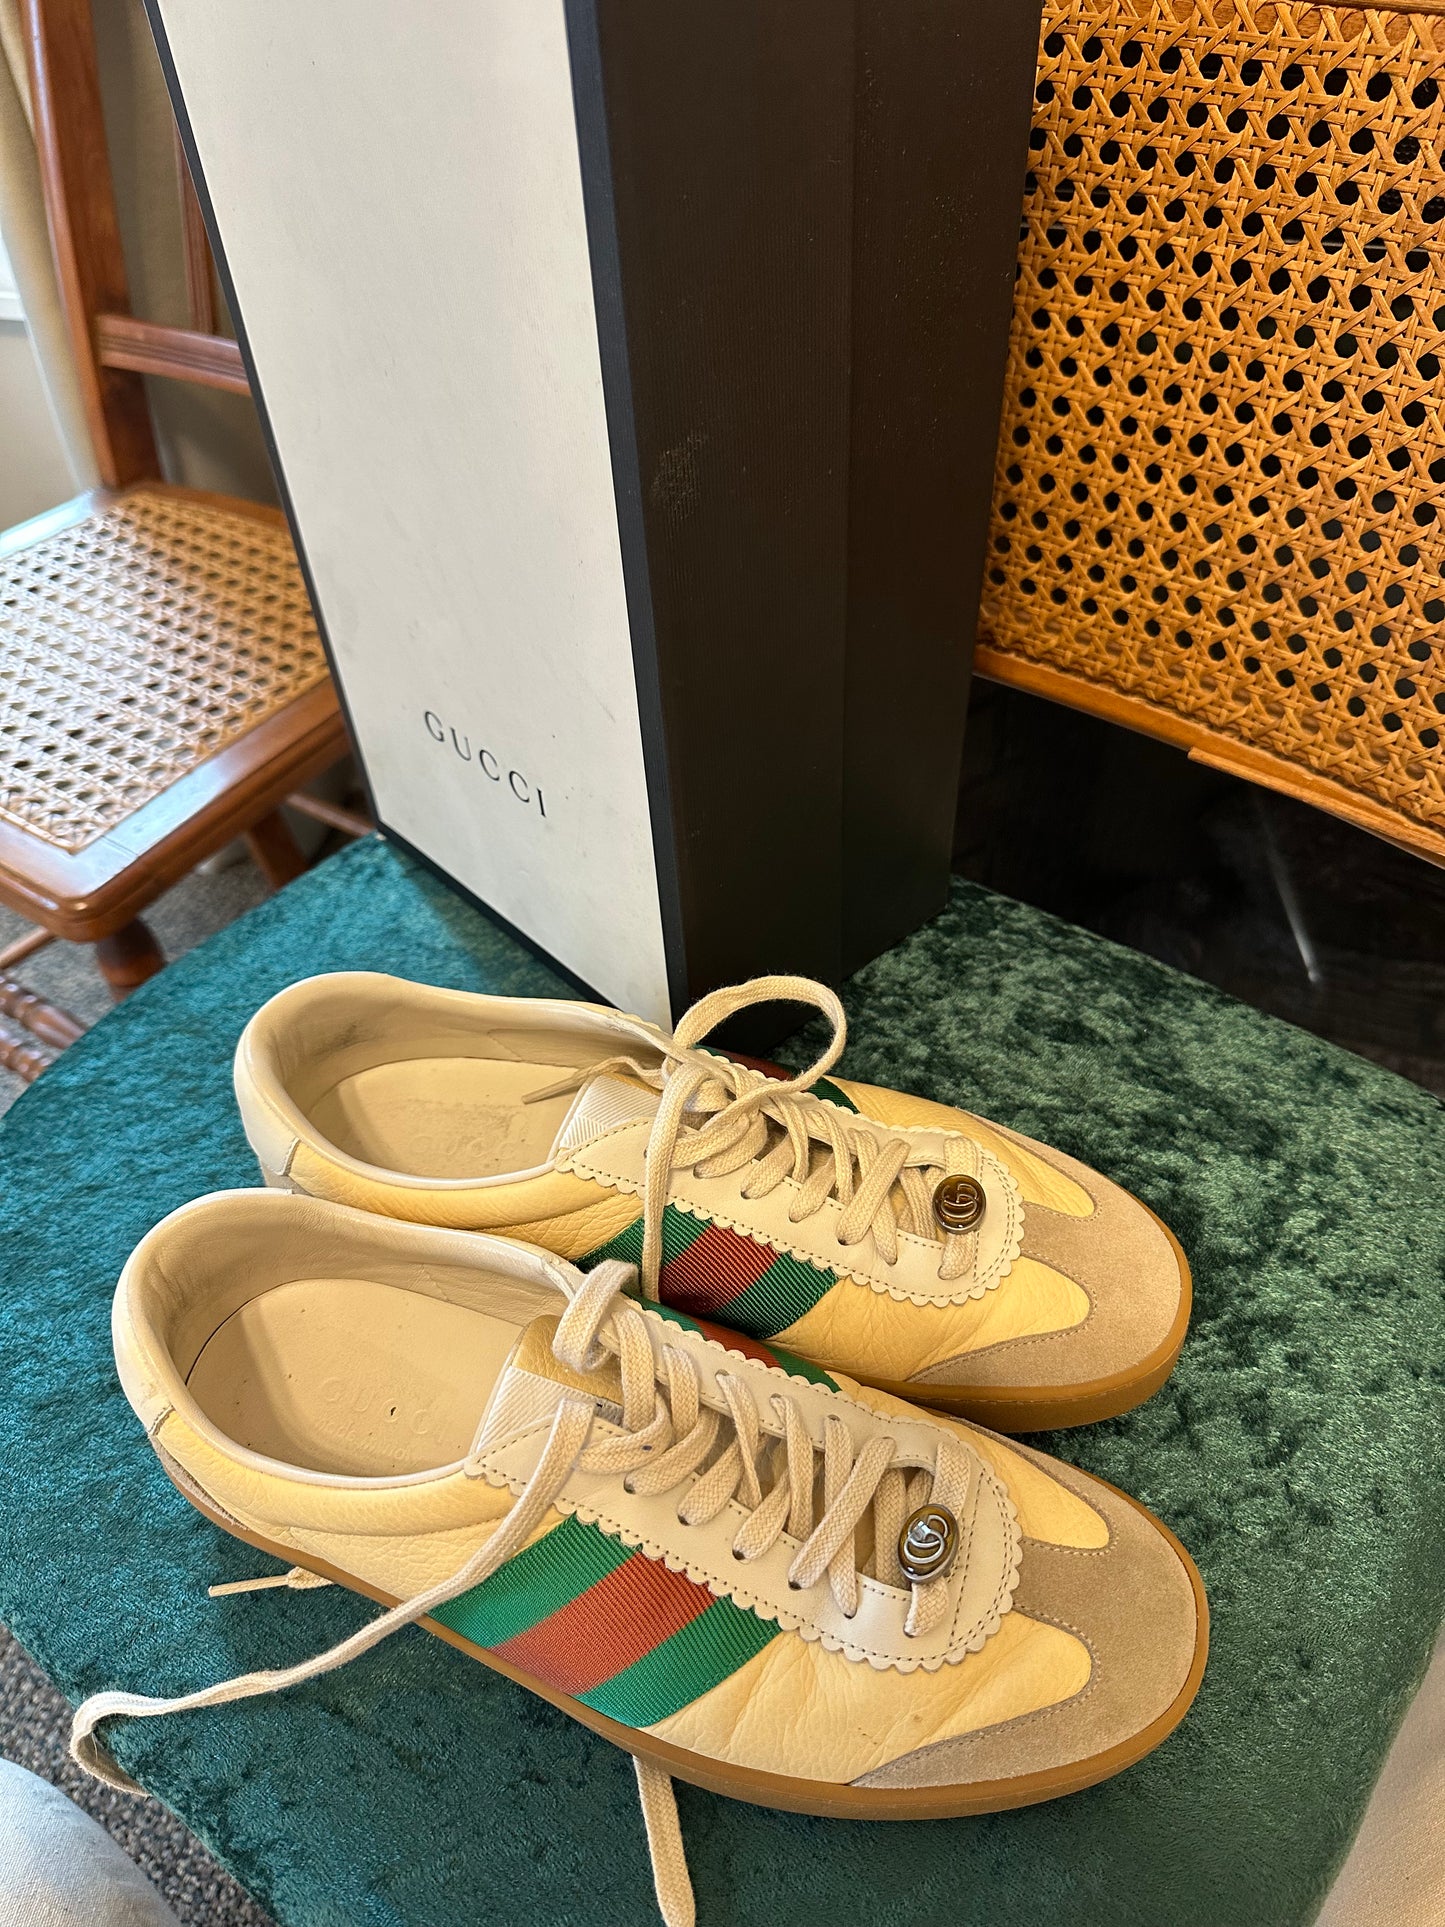 Gucci Leather Striped Sneakers